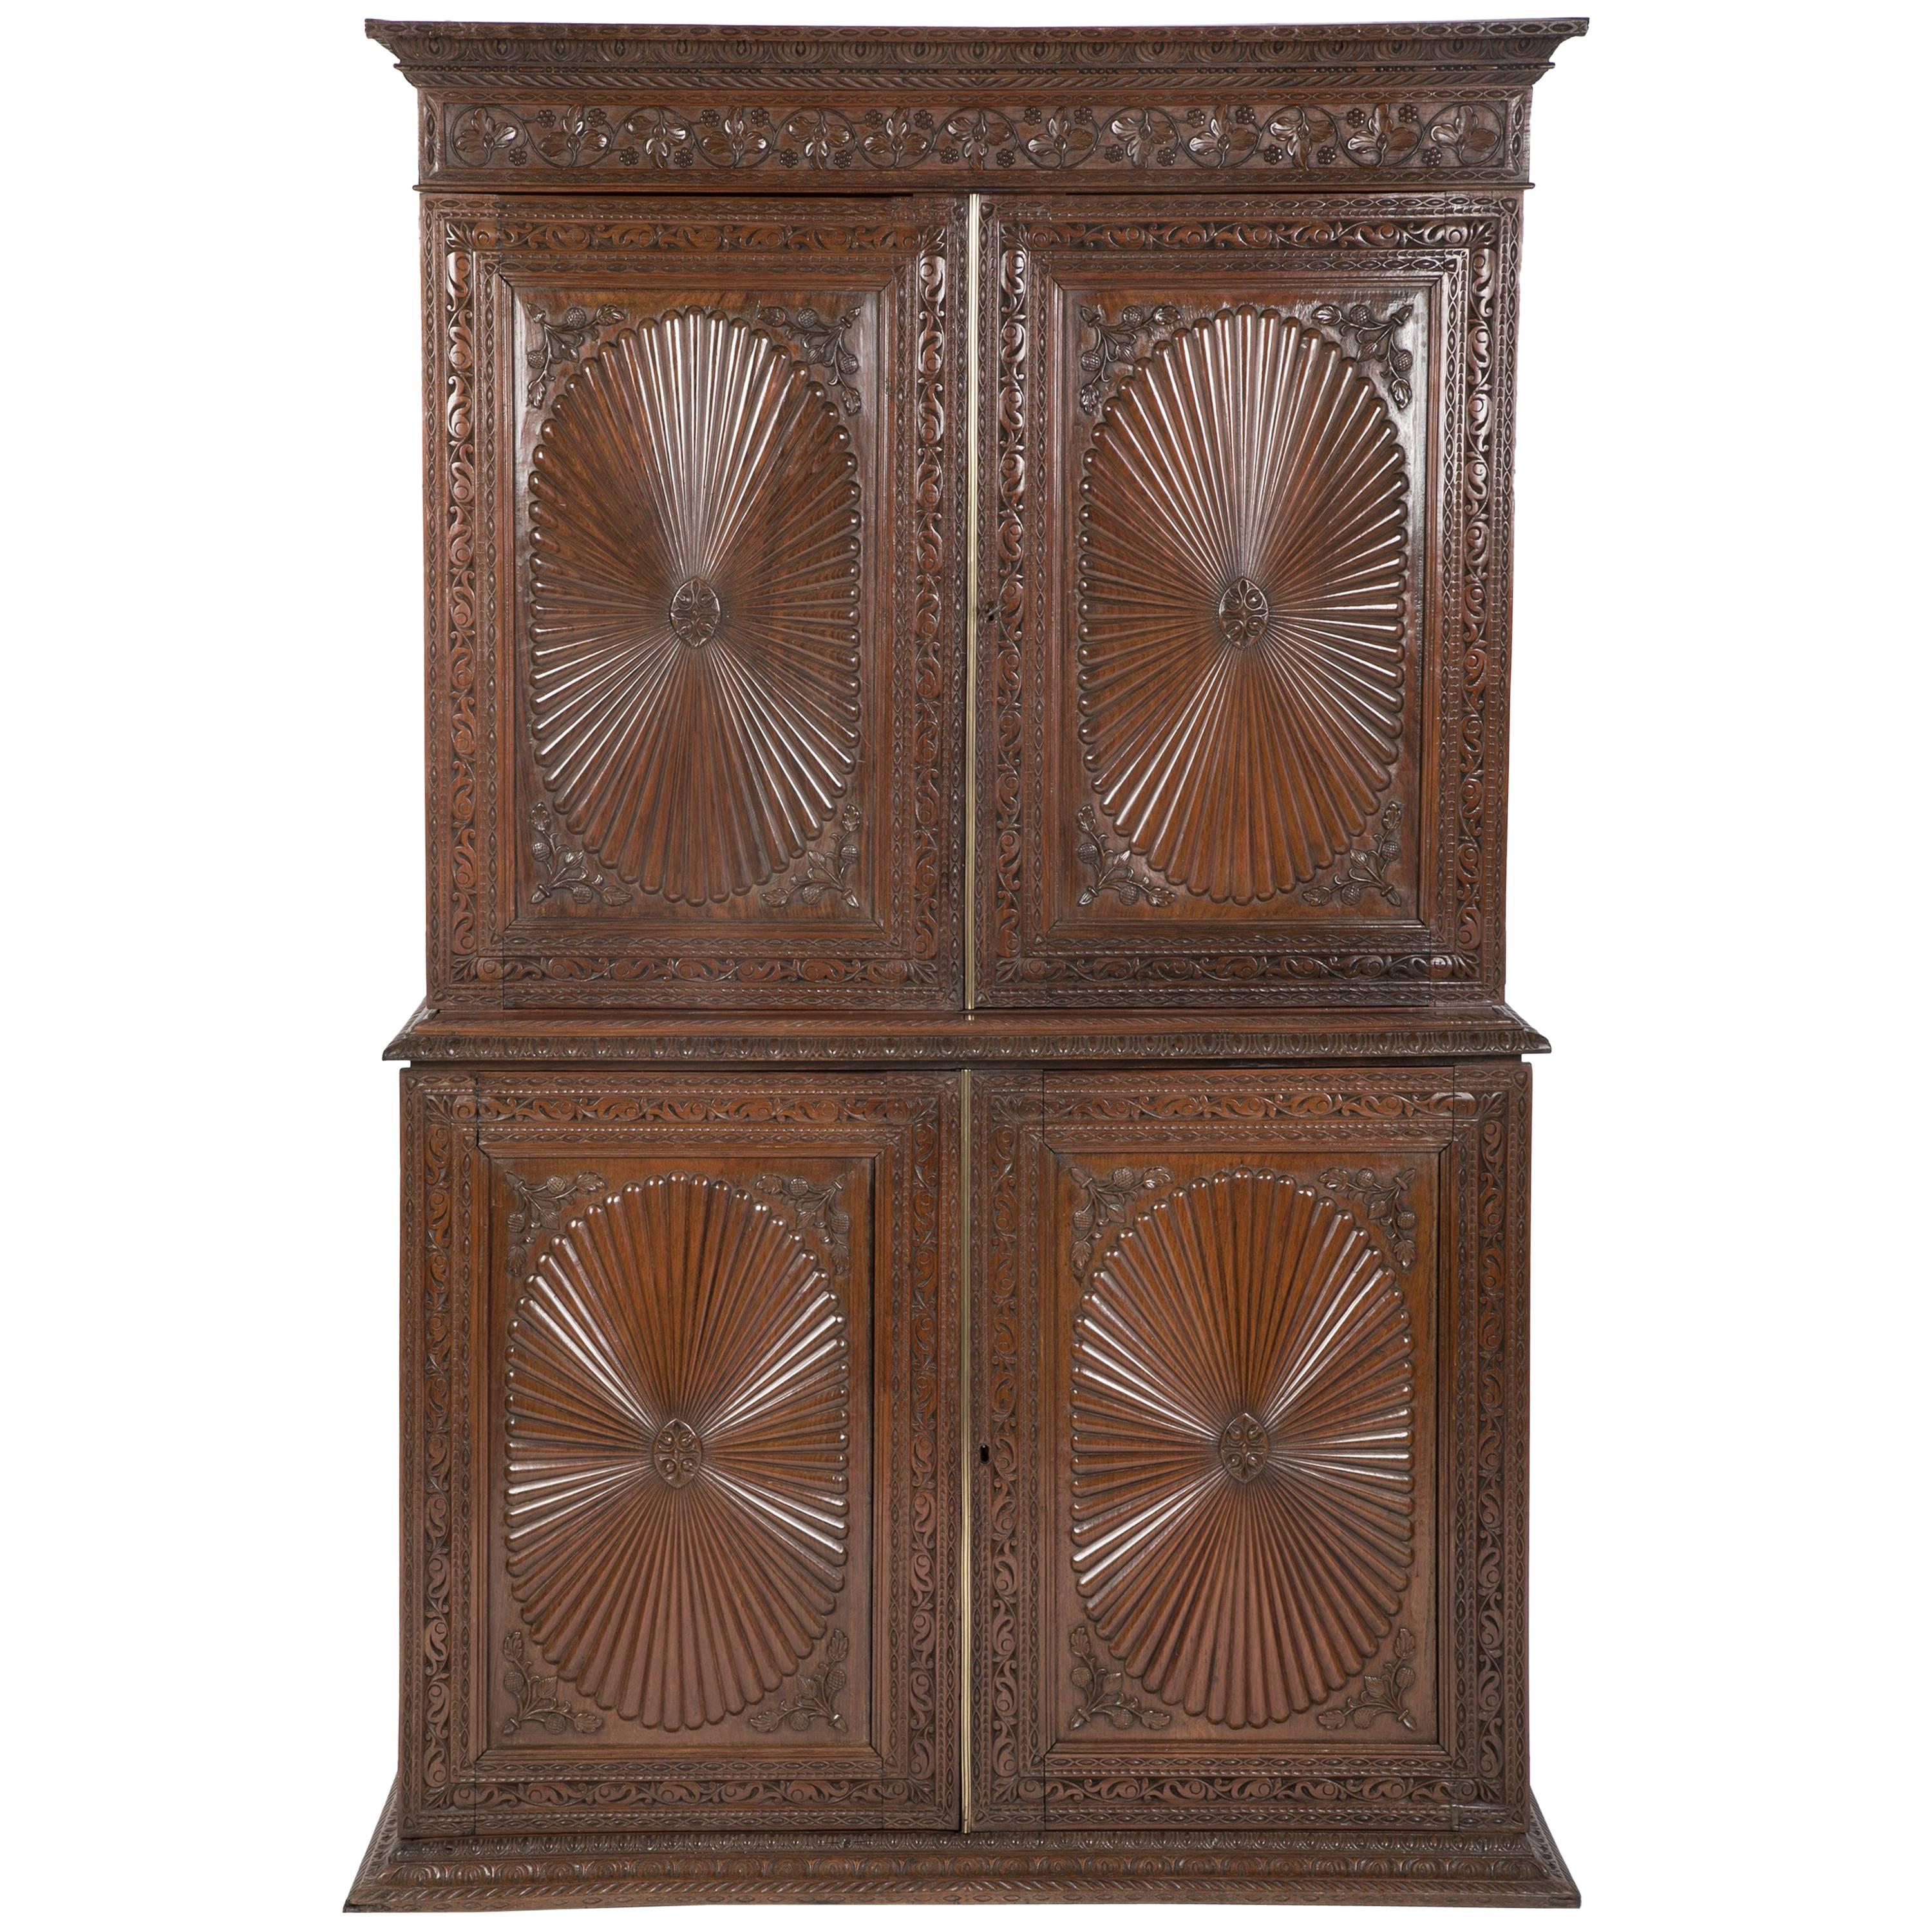 Anglo-Indian Rosewood Regency Style Cabinet